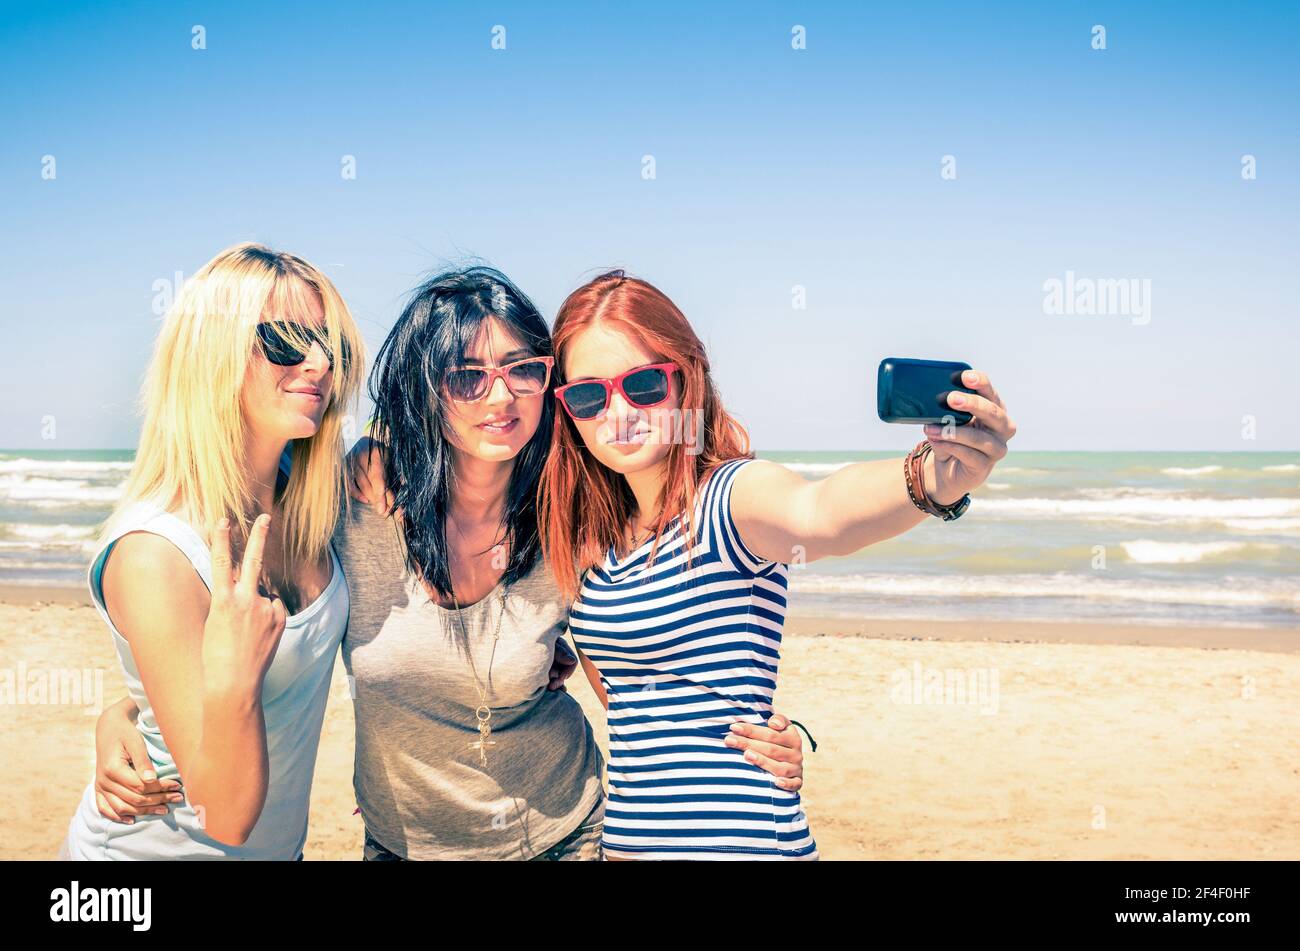 Group of girlfriends taking a selfie at the beach - Concept of friendship and fun in the summer with new trends and technology Stock Photo